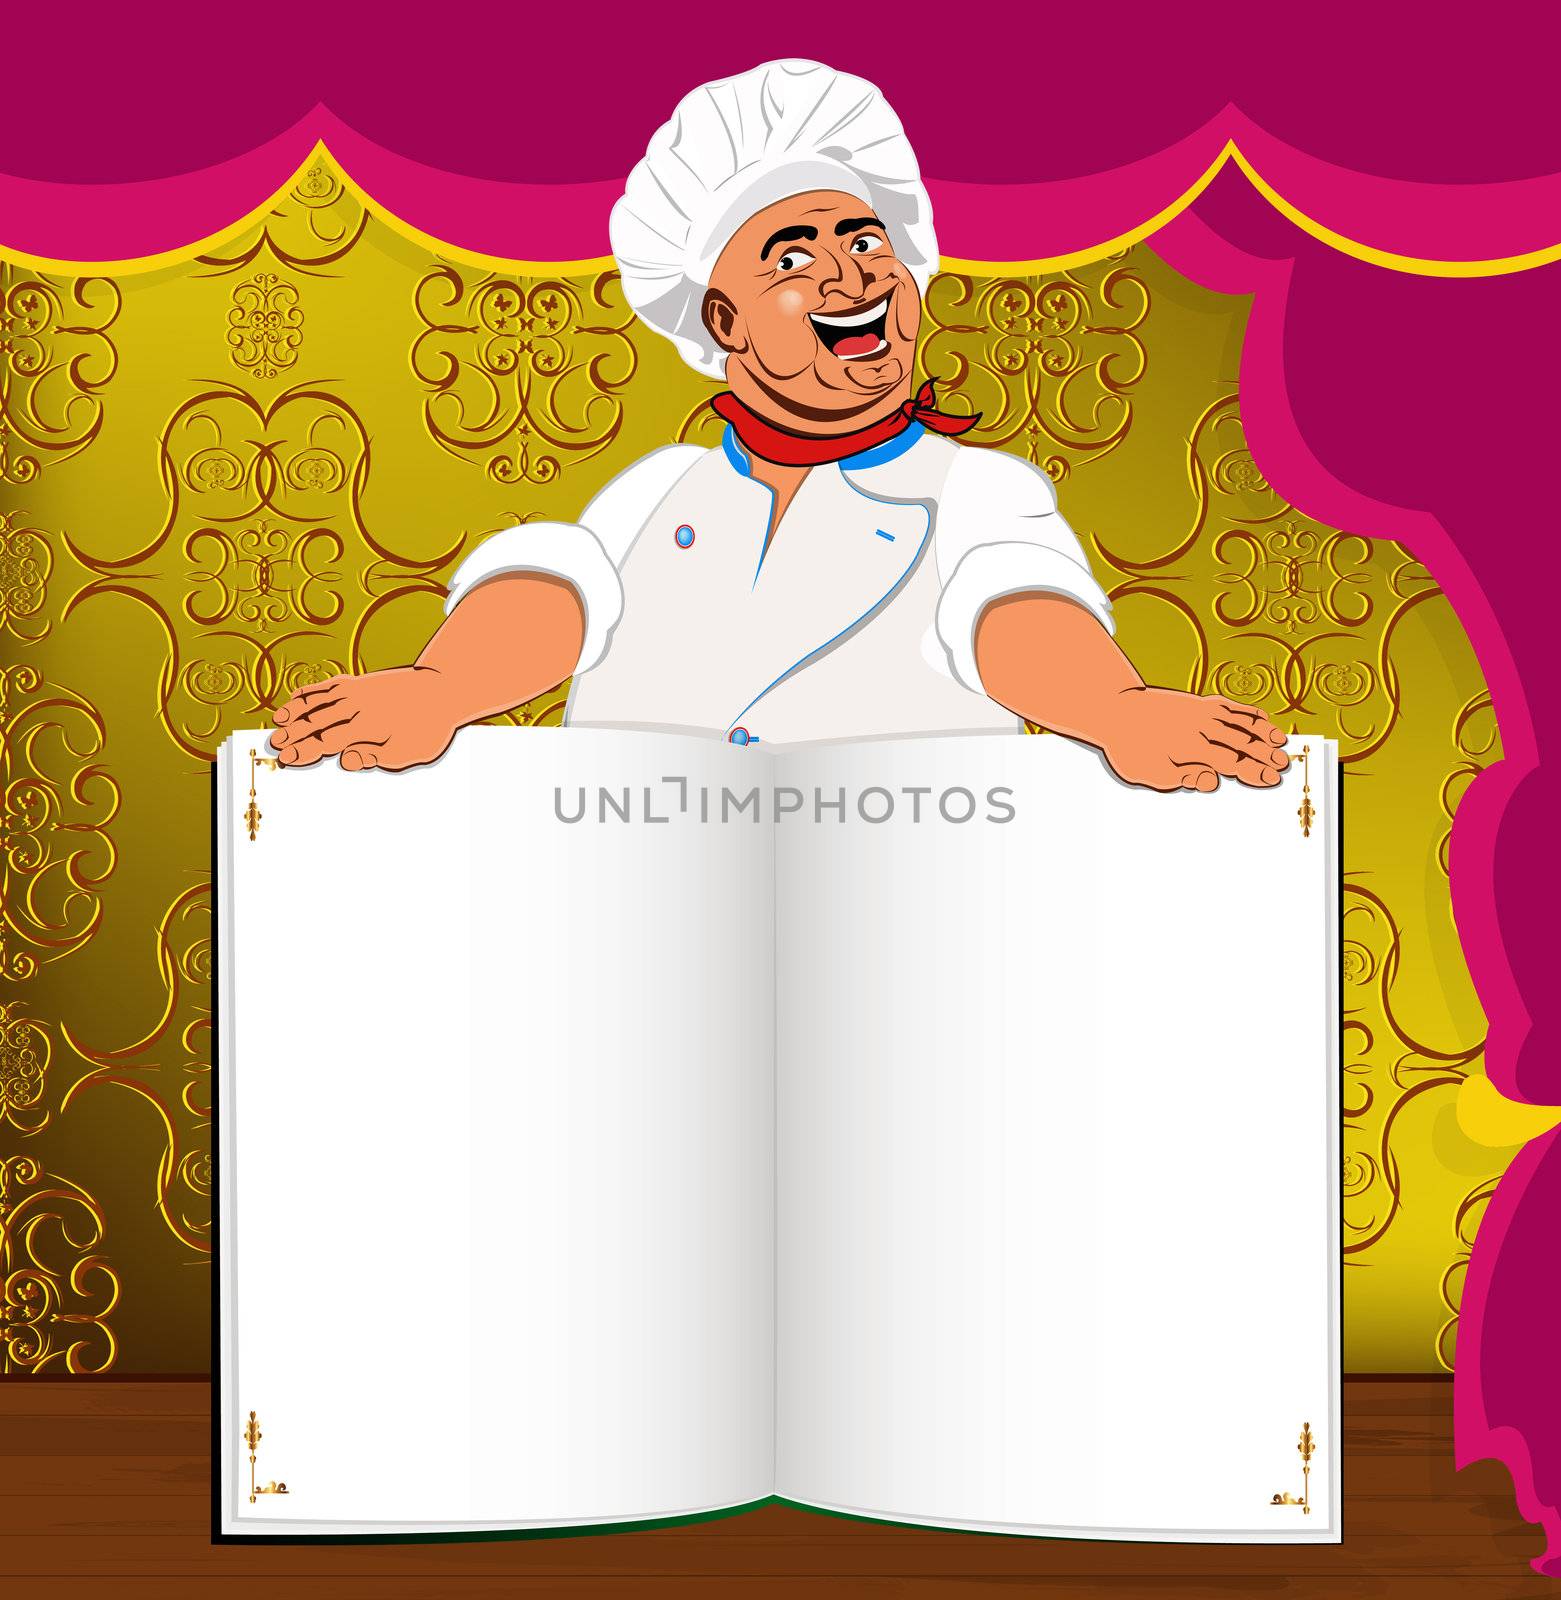 Funny Chef and book menu for Gourmet in interior restaurant by sergey150770SV